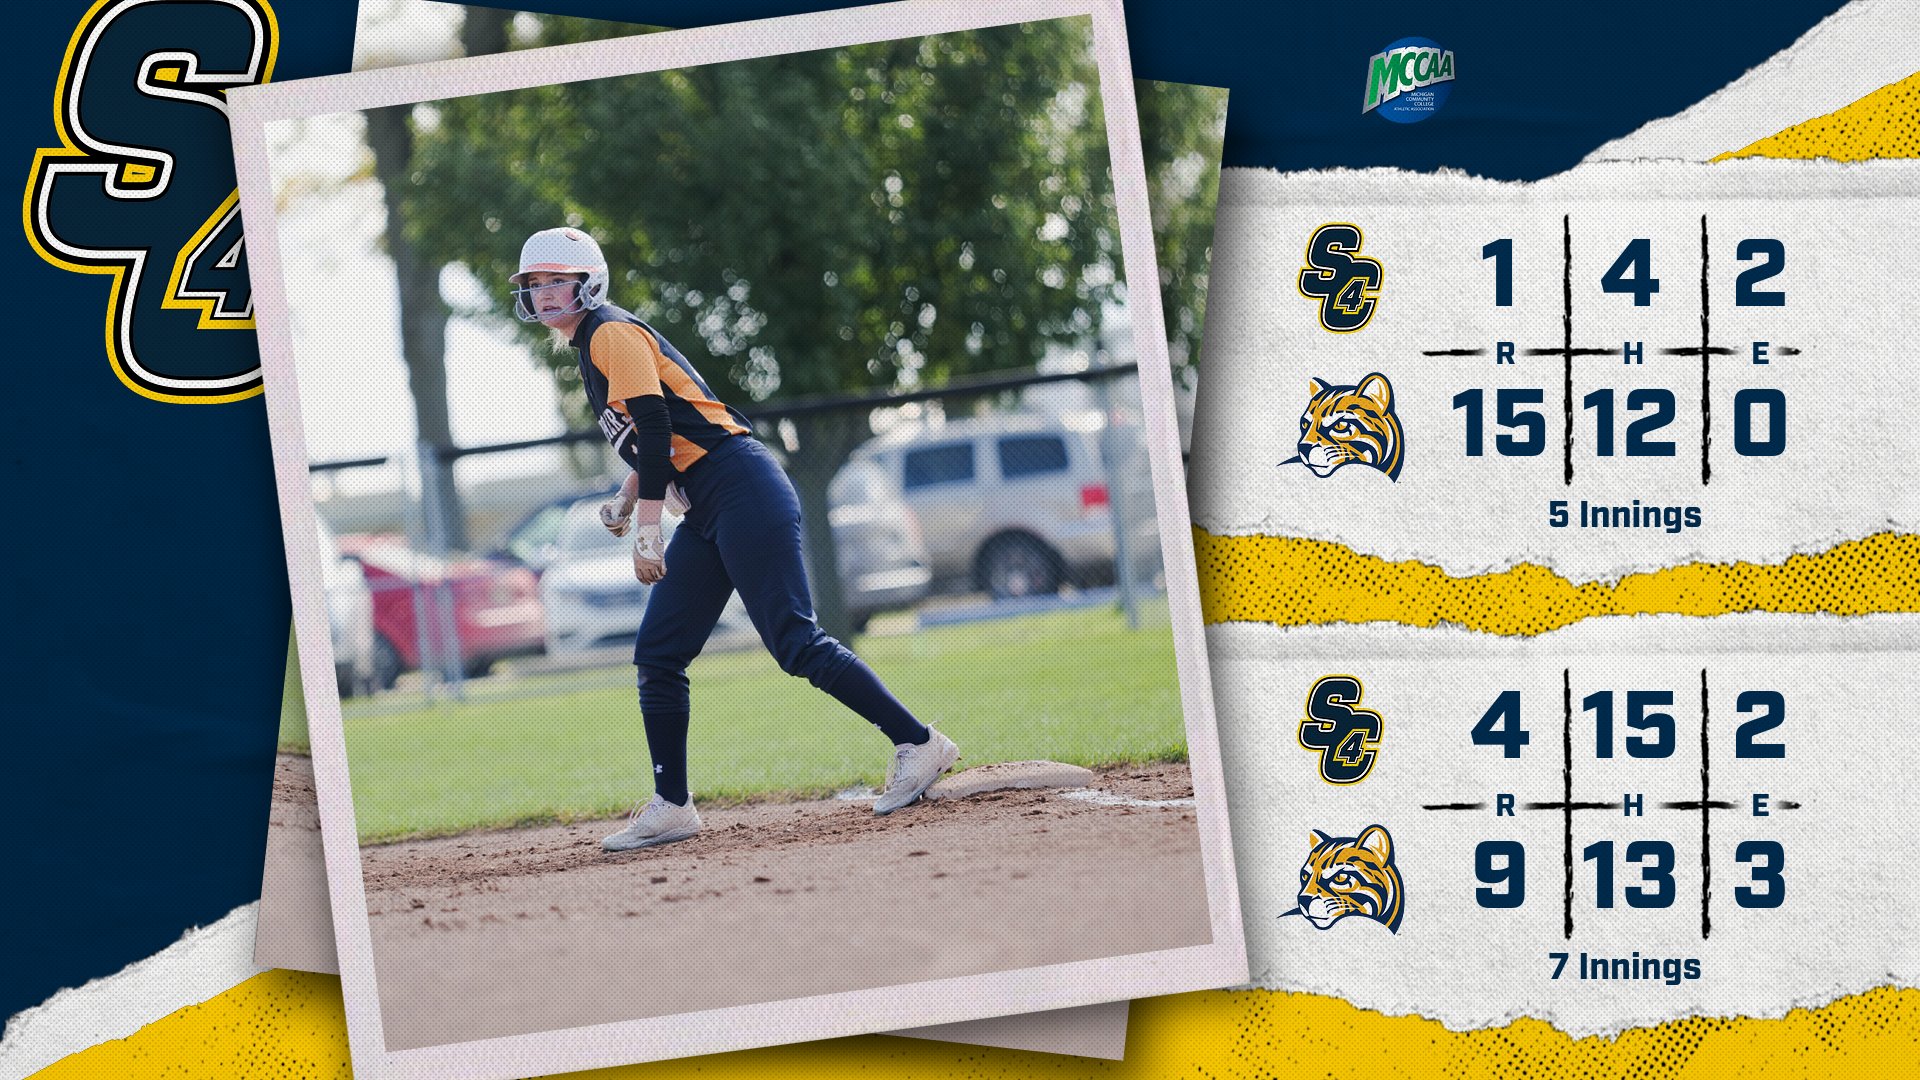 Softball: Sweep Drops SC4 Into 4th Place in the Confernence